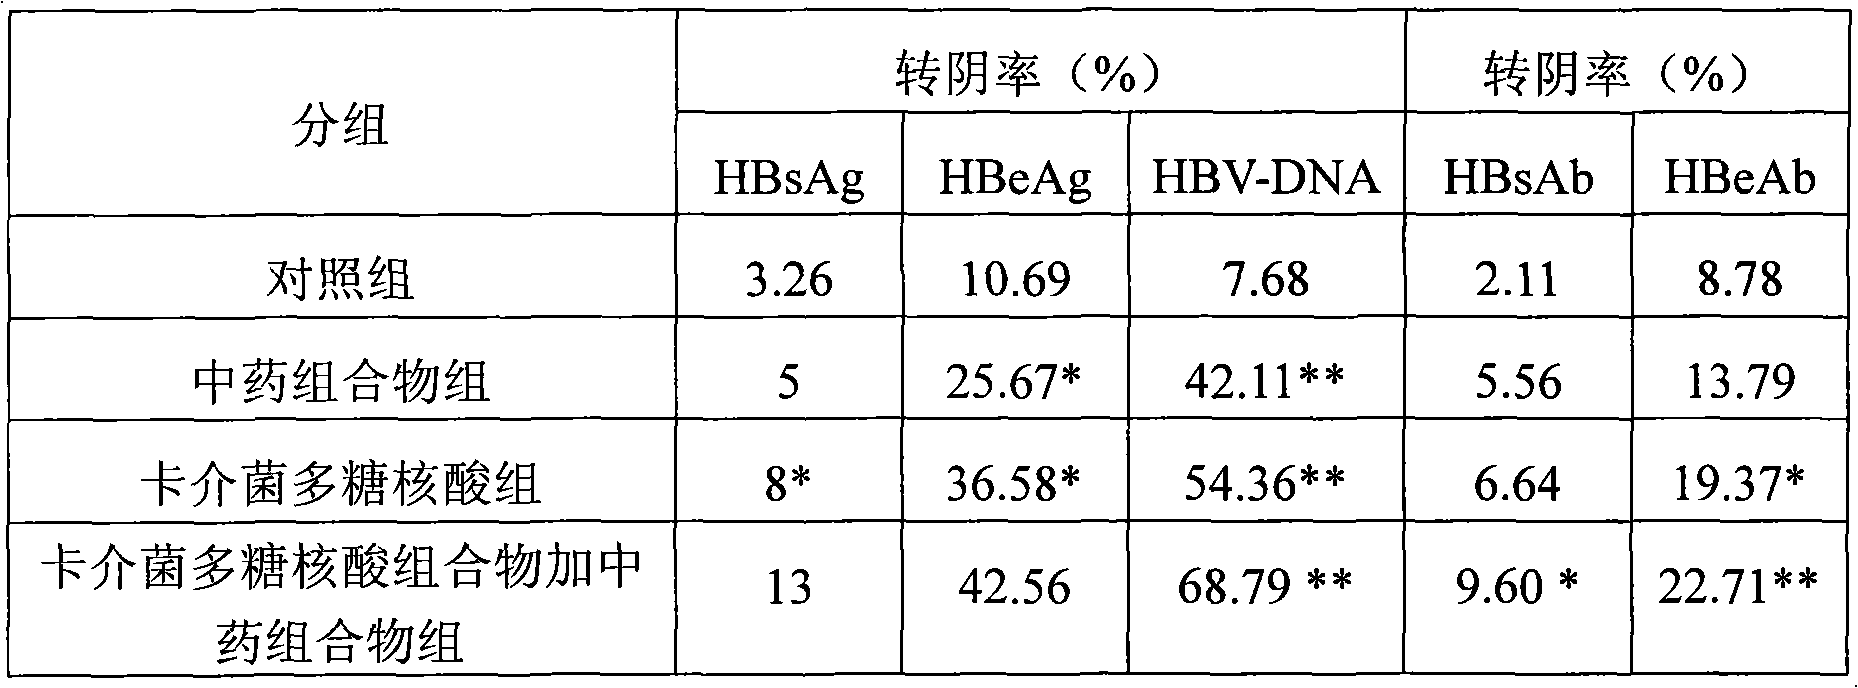 Medicine combination and application thereof in preparing preparations for treating chronic hepatitis B